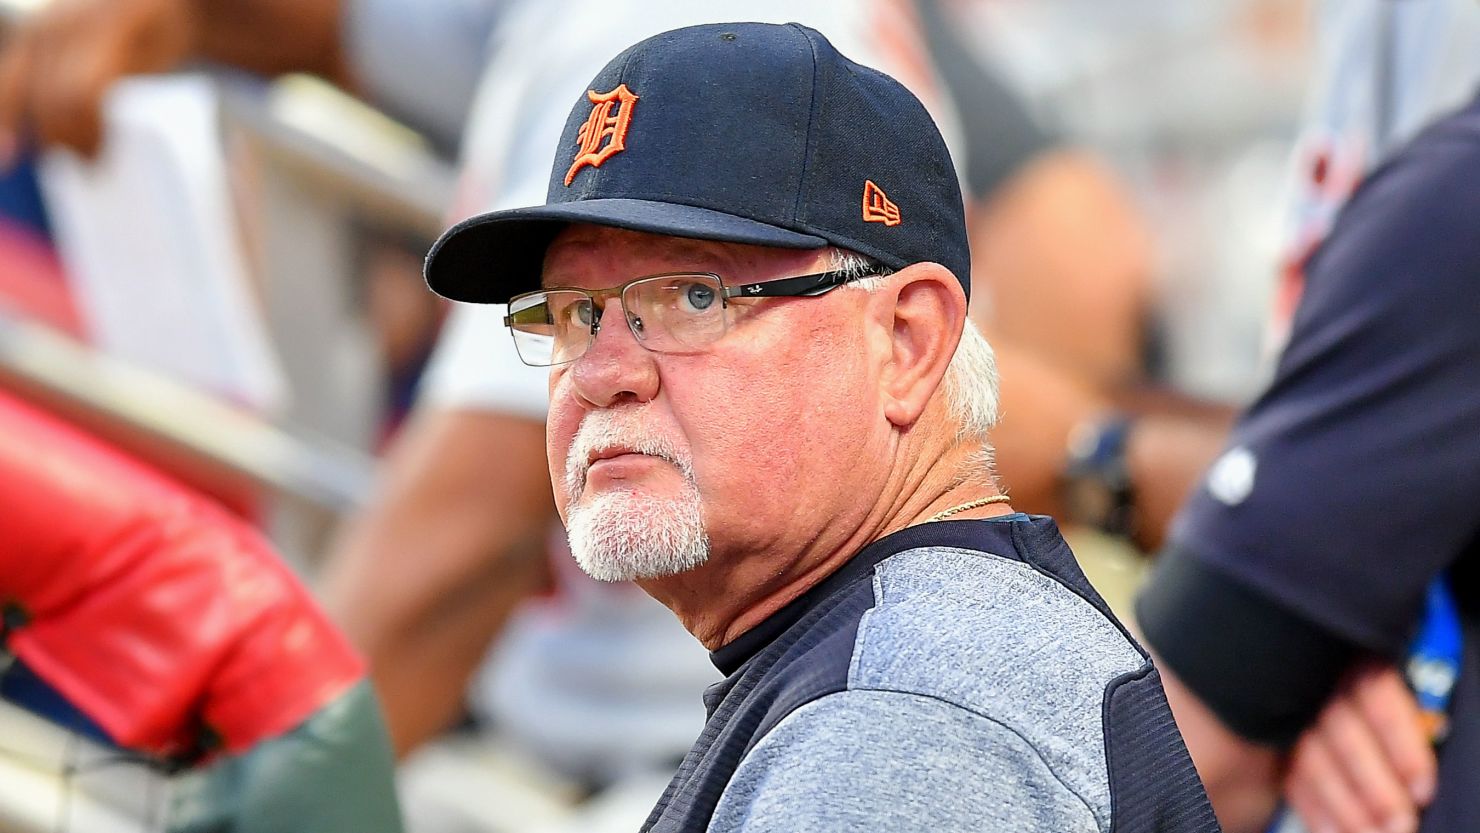 Detroit Tigers manager Ron Gardenhire looks on from the dugout as the Tigers played the Atlanta Braves on May 31, 2019 at SunTrust Park in Atlanta.